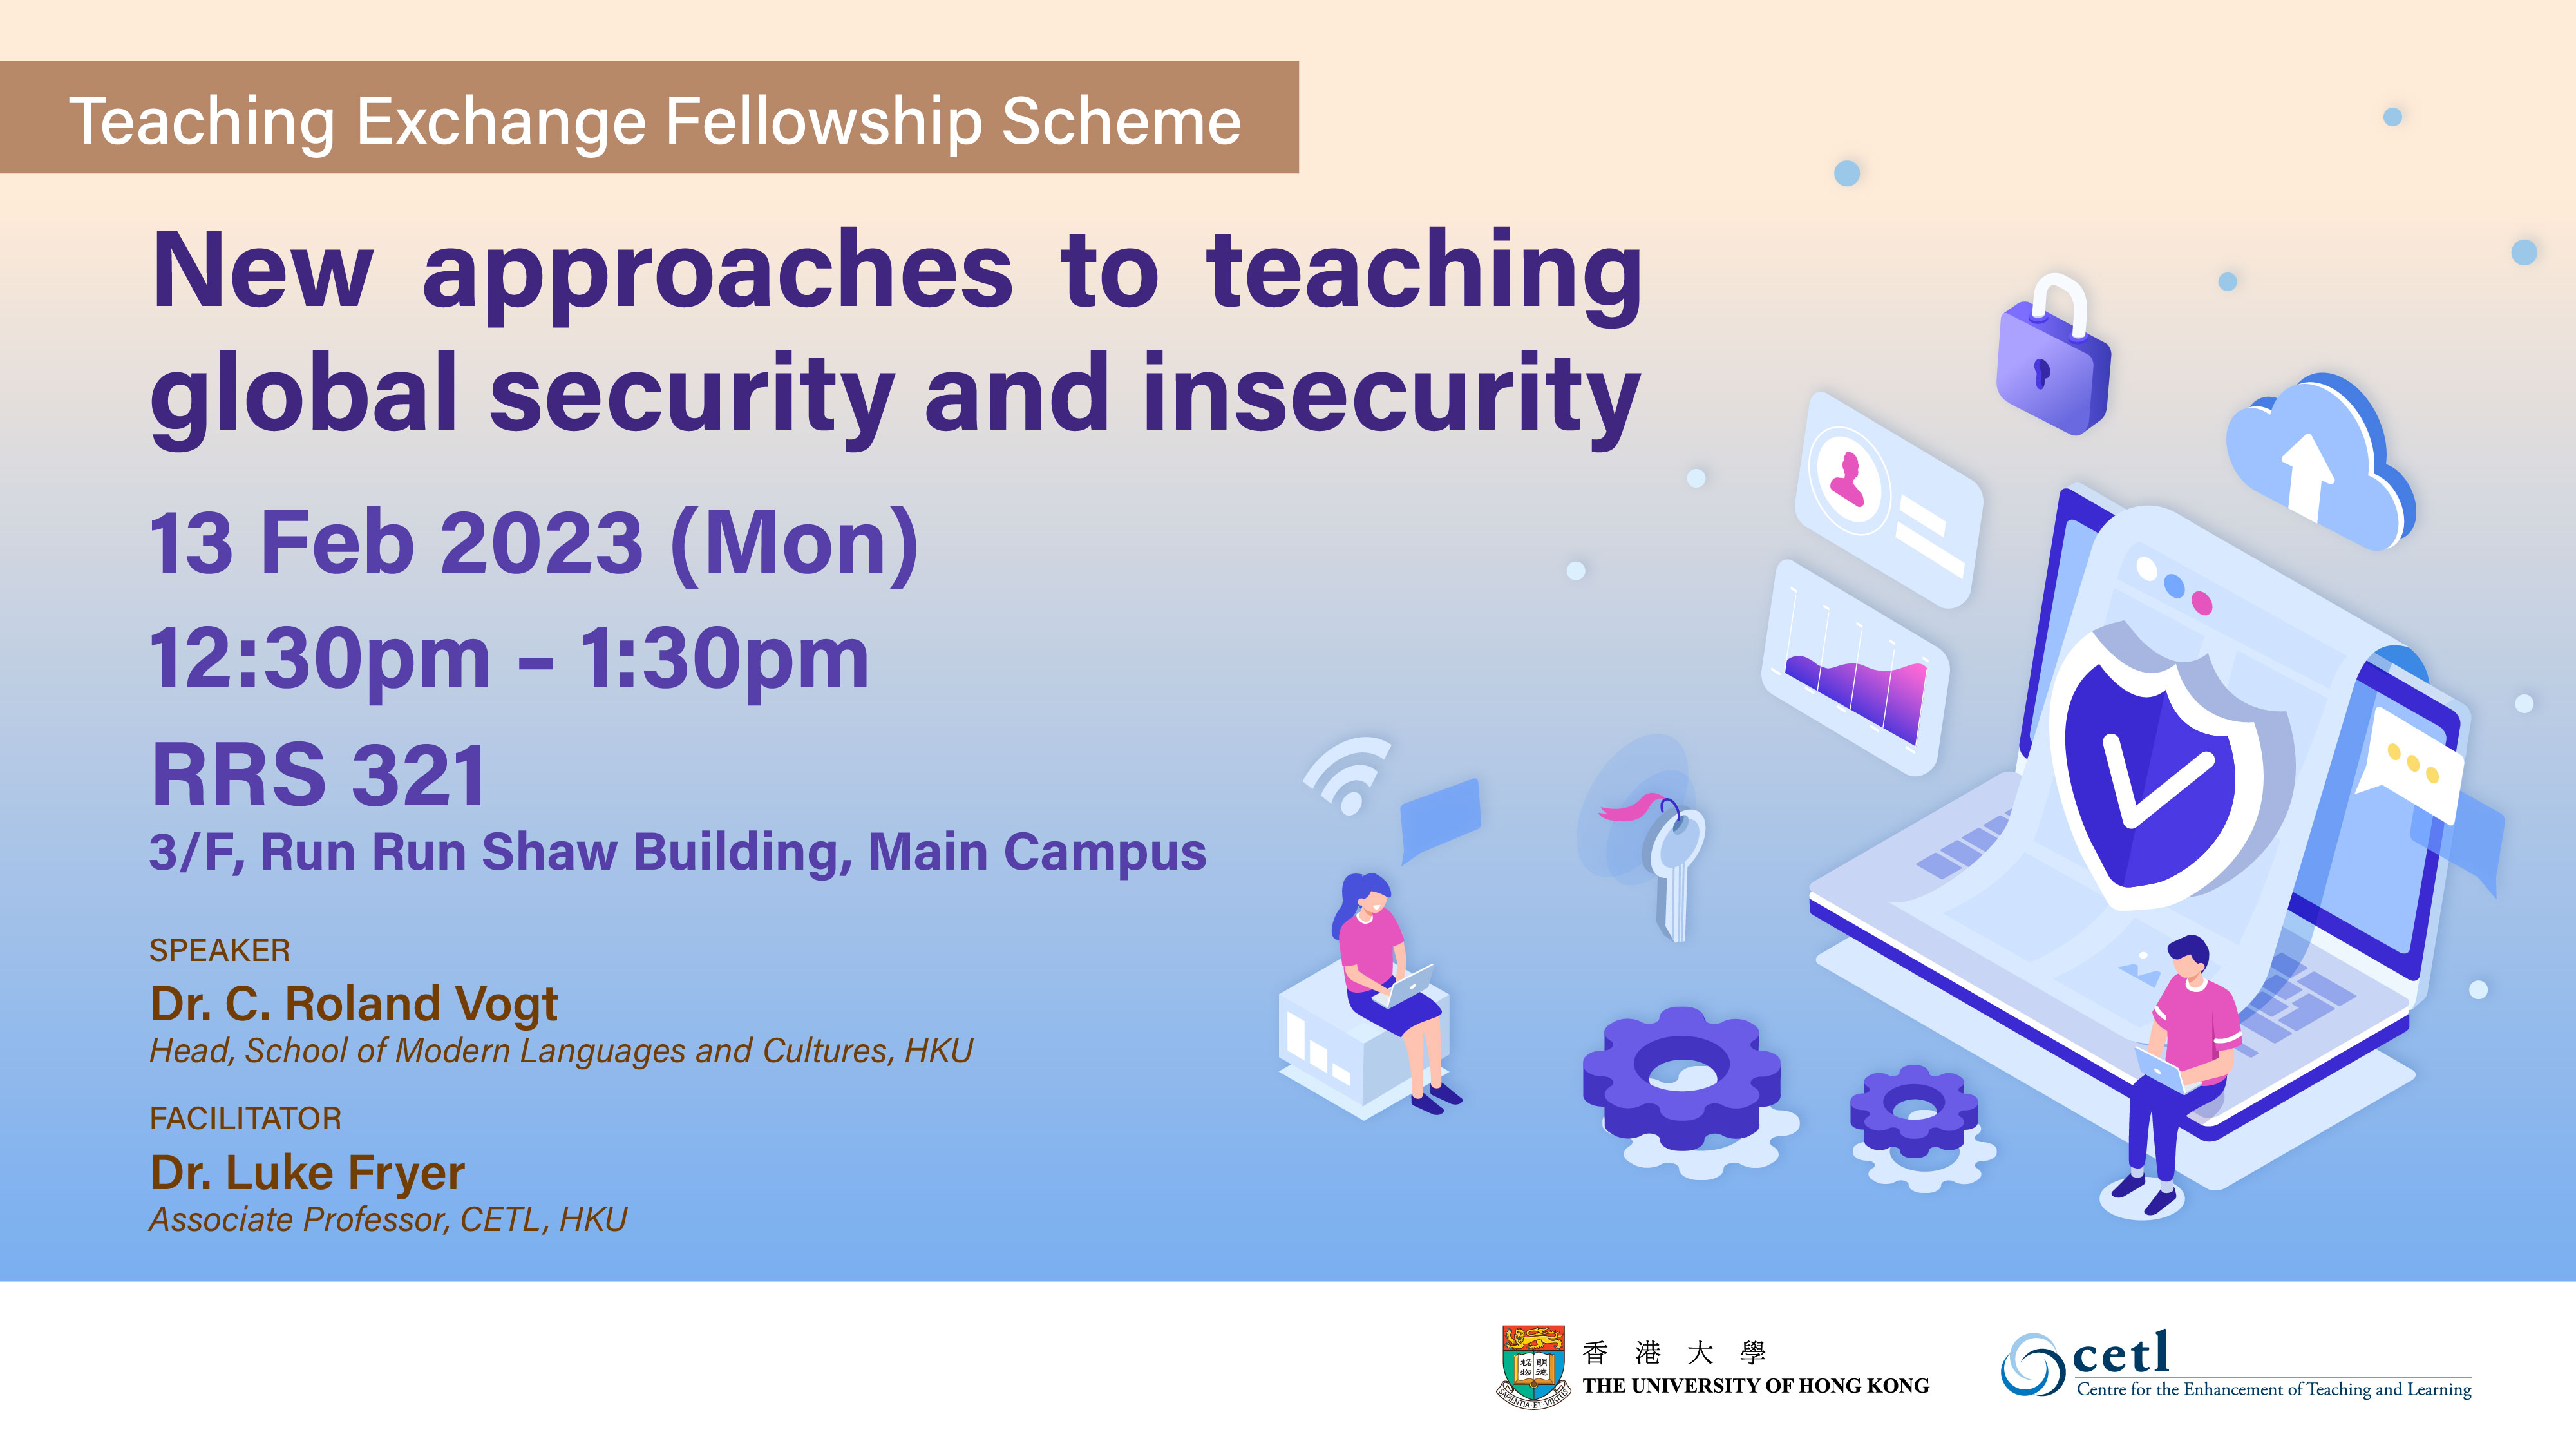 Teaching Exchange Fellowship Scheme Seminar 2023 - New approaches to teaching global security and insecurity